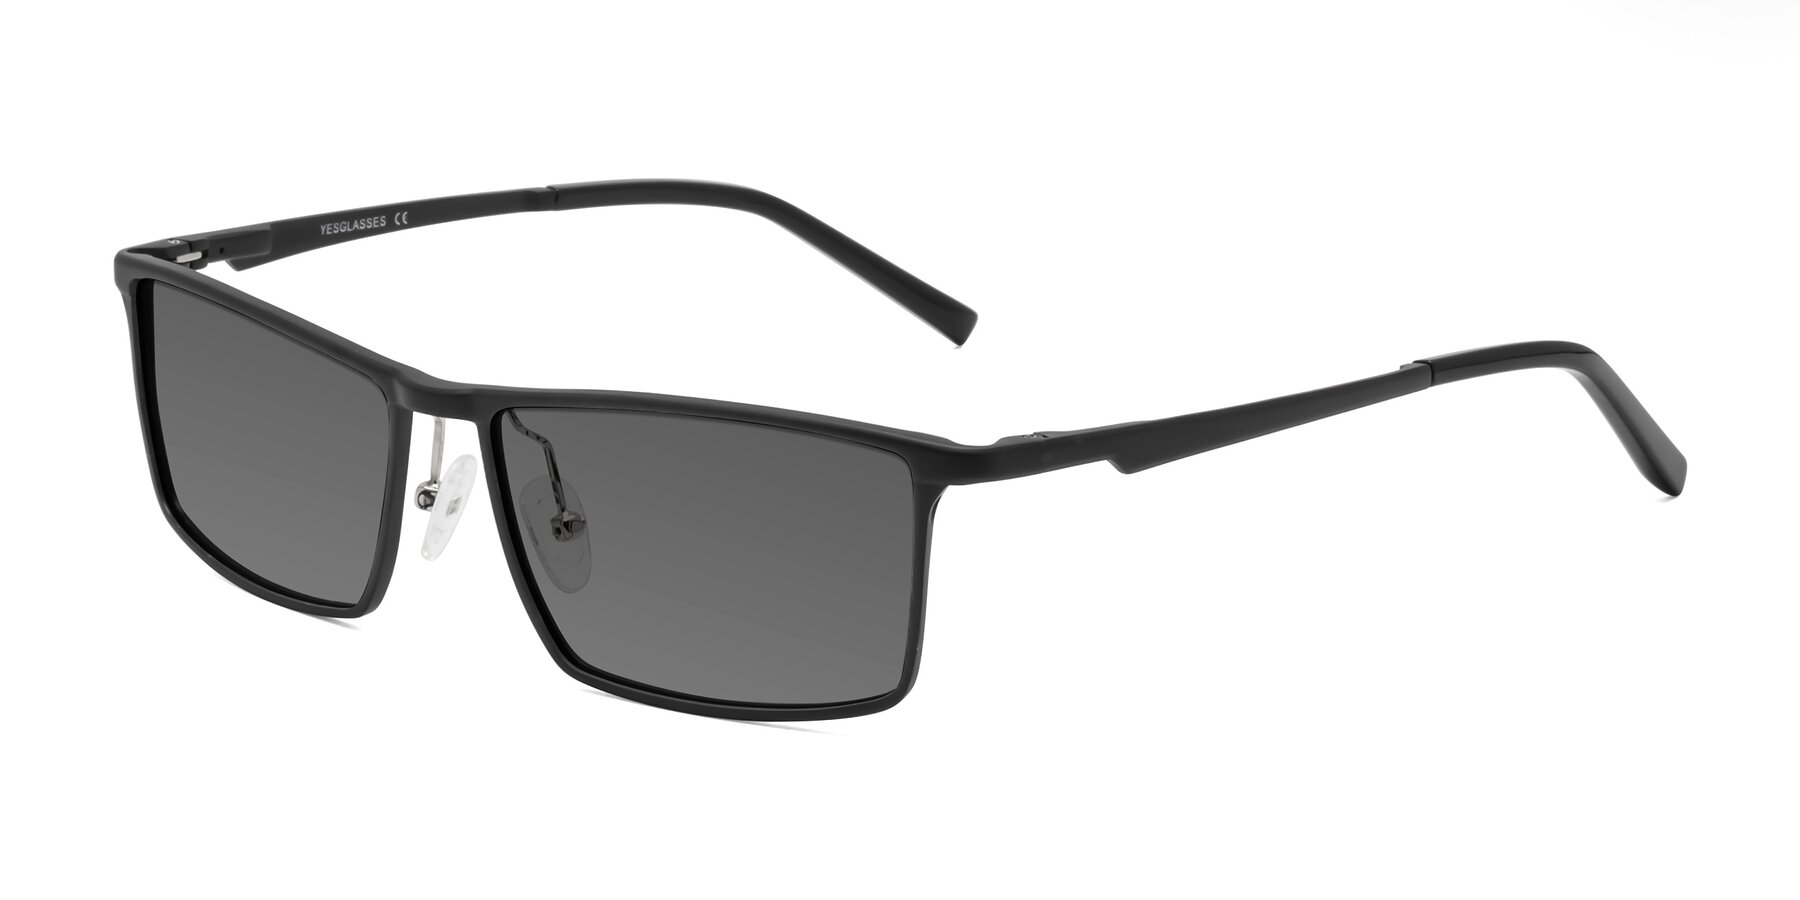 Angle of CX6330 in Black with Medium Gray Tinted Lenses